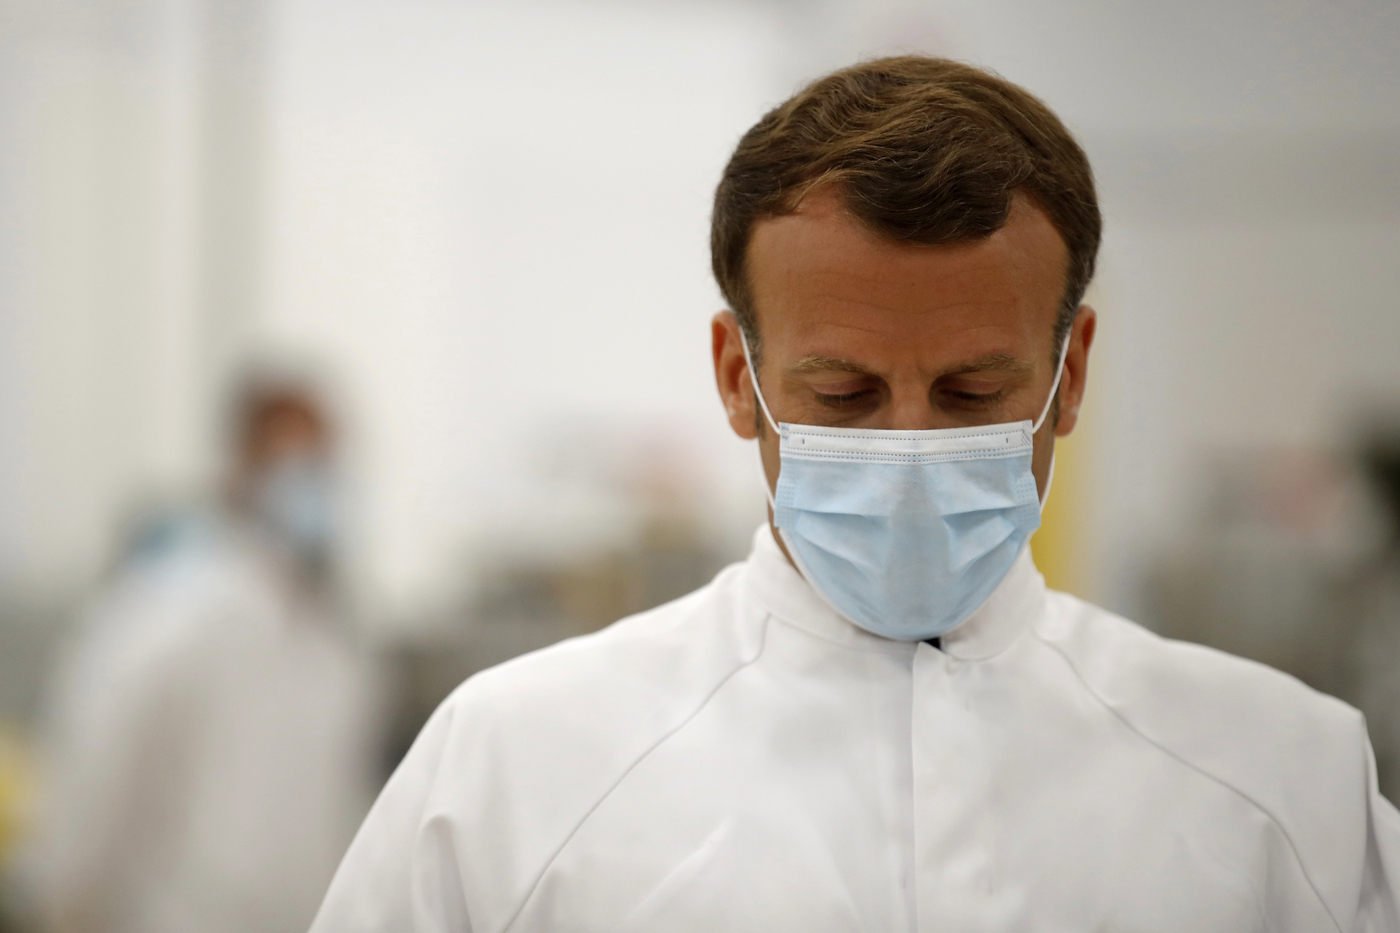 French President Emmanuel Macron, wearing a protective face mask, visits an industrial development laboratory at the French drugmaker's vaccine unit Sanofi Pasteur plant in Marcy-l'Etoile, near Lyon, central France, Tuesday, June 16, 2020. The visit comes after rival pharmaceutical company AstraZeneca this weekend announced a deal to supply 400 million vaccine doses to EU countries, including France. (Gonzalo Fuentes/Pool via AP)